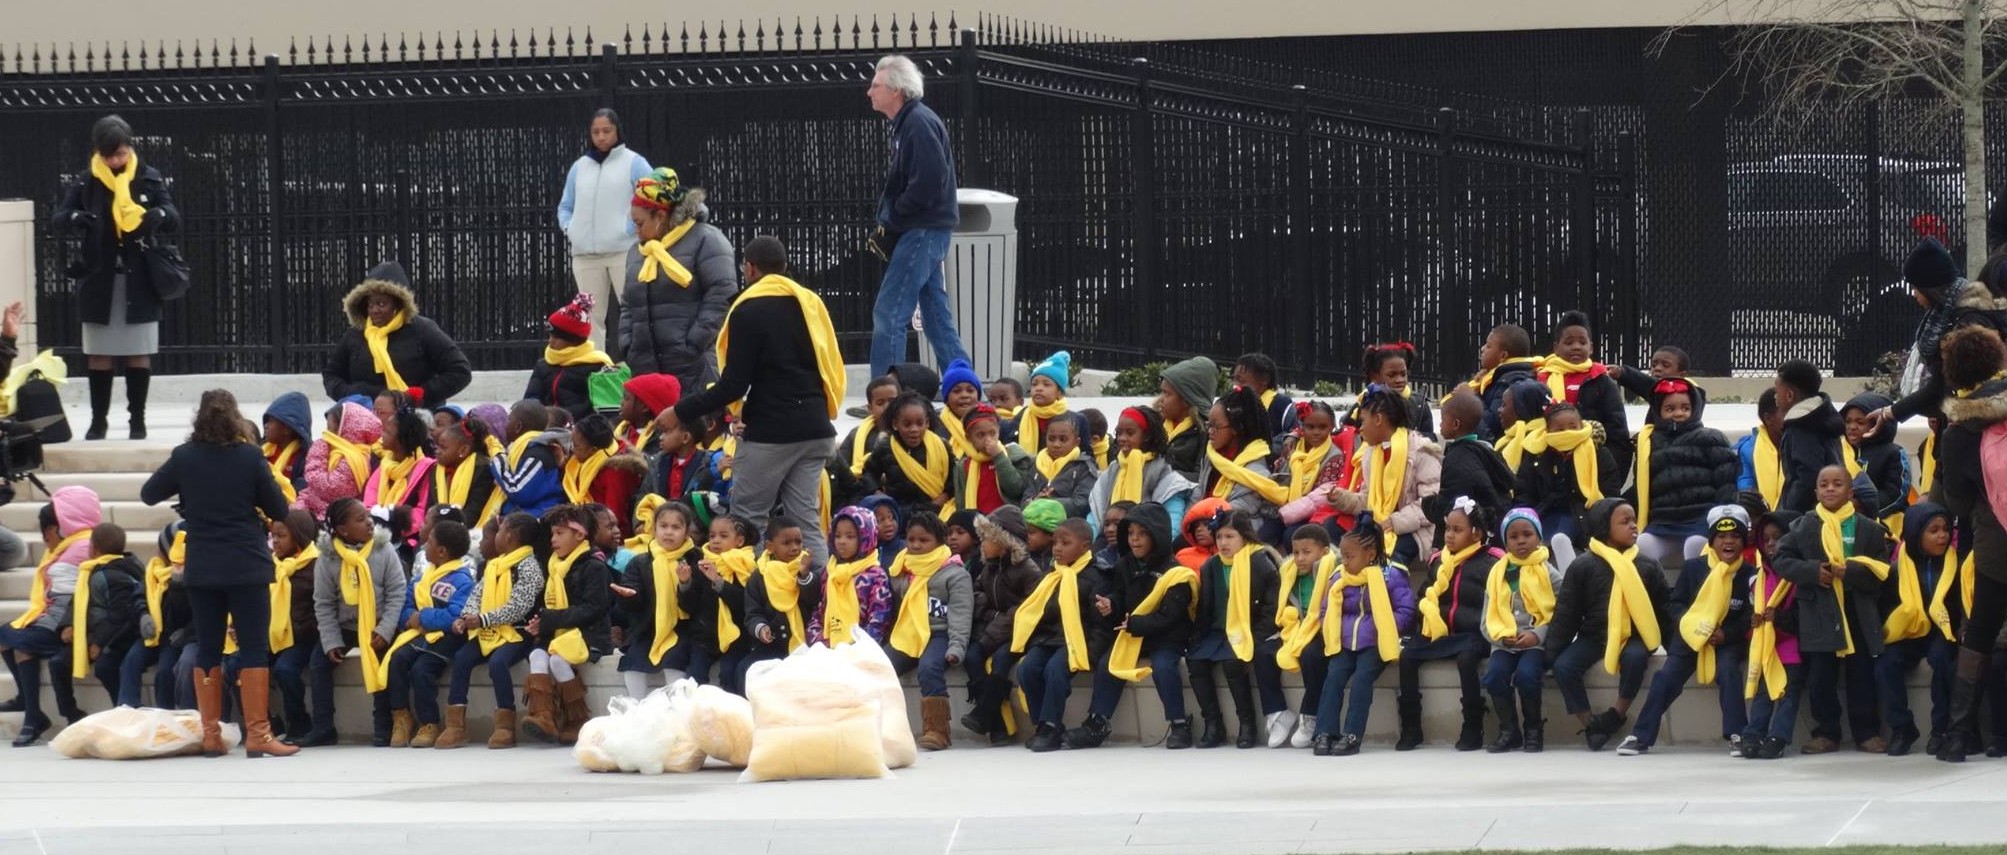 Hundreds of schoolchildren braved chilly temperatures Wednesday to attend the National School Choice Week rally at the Georgia State Capitol in Atlanta